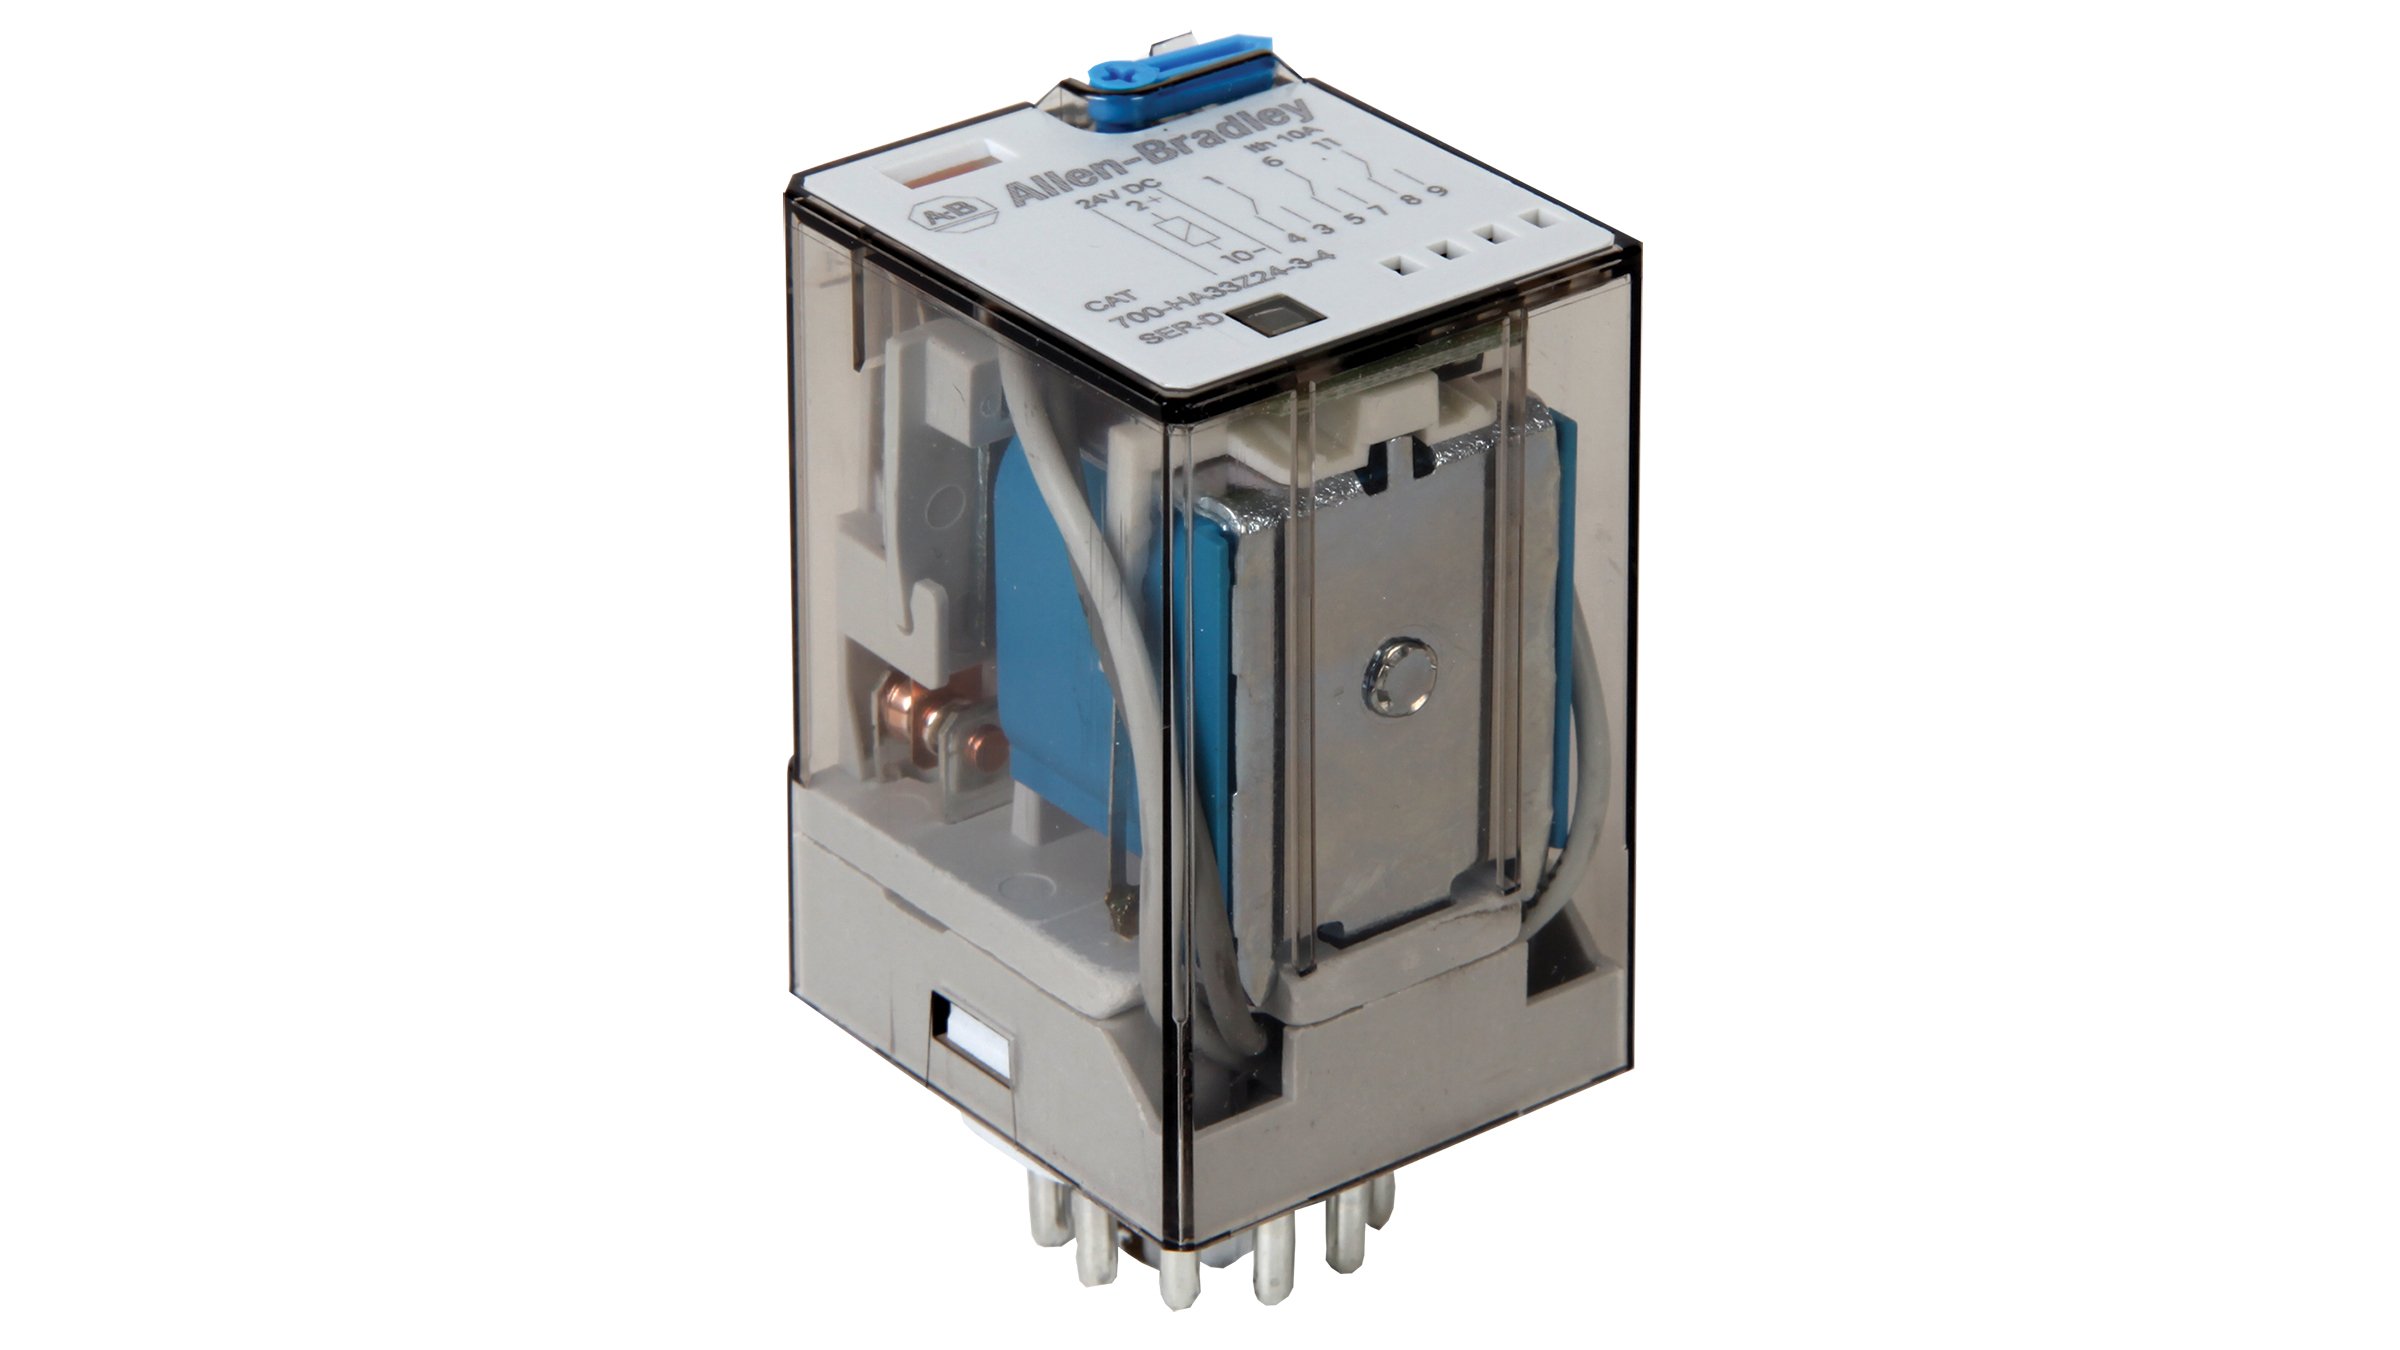 Allen-Bradley Bulletin 700-HA Tube Base Relays are general purpose relays ideally suited for applications machine tool, pulp and paper, and transportation OEMs